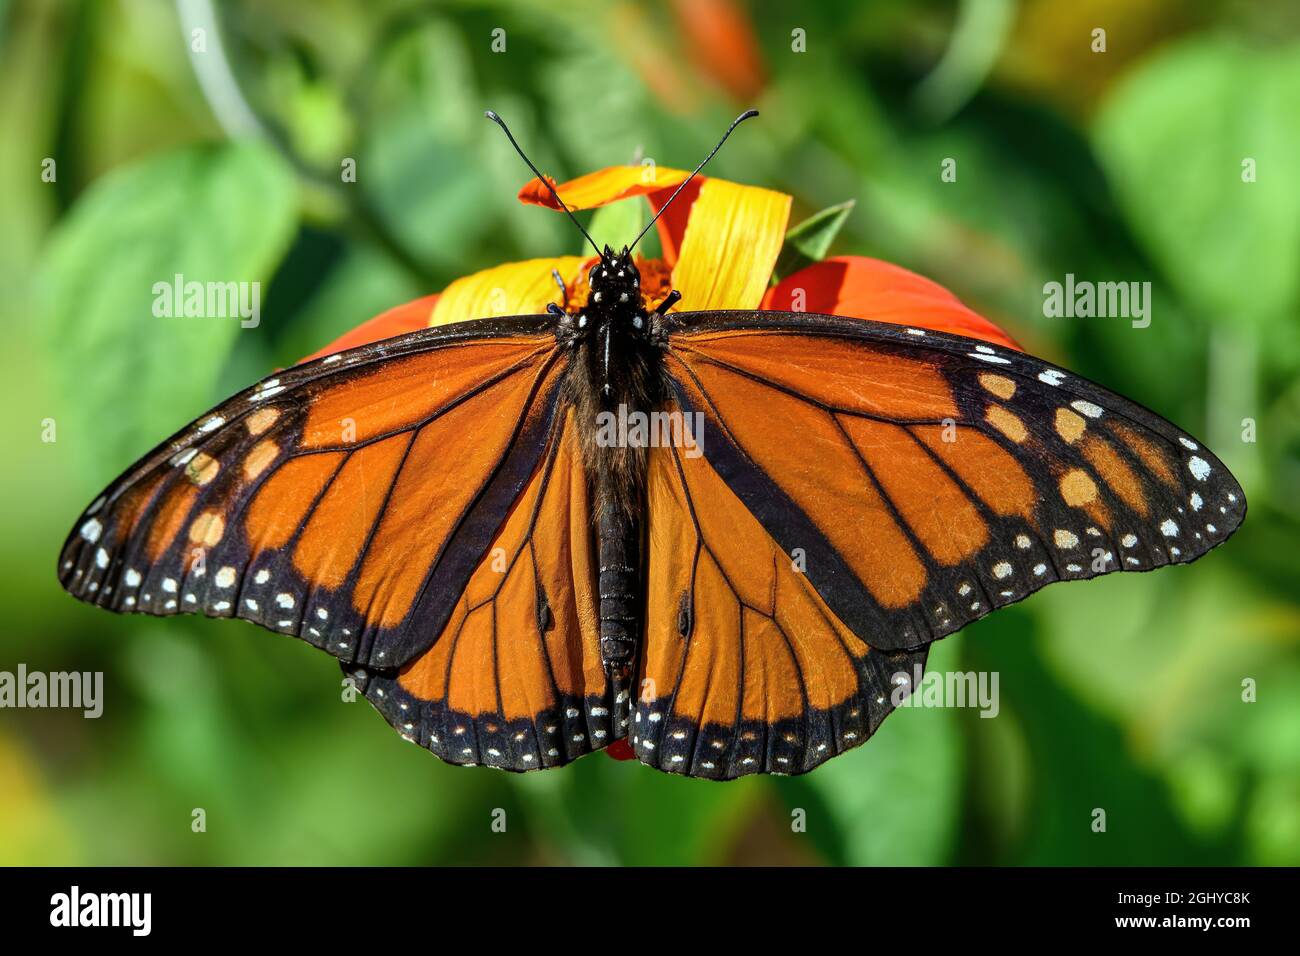 Male Monarch butterfly in the late summer sun. The monarch is a milkweed butterfly in the family Nymphalidae and is threatened by severe habitat loss Stock Photo